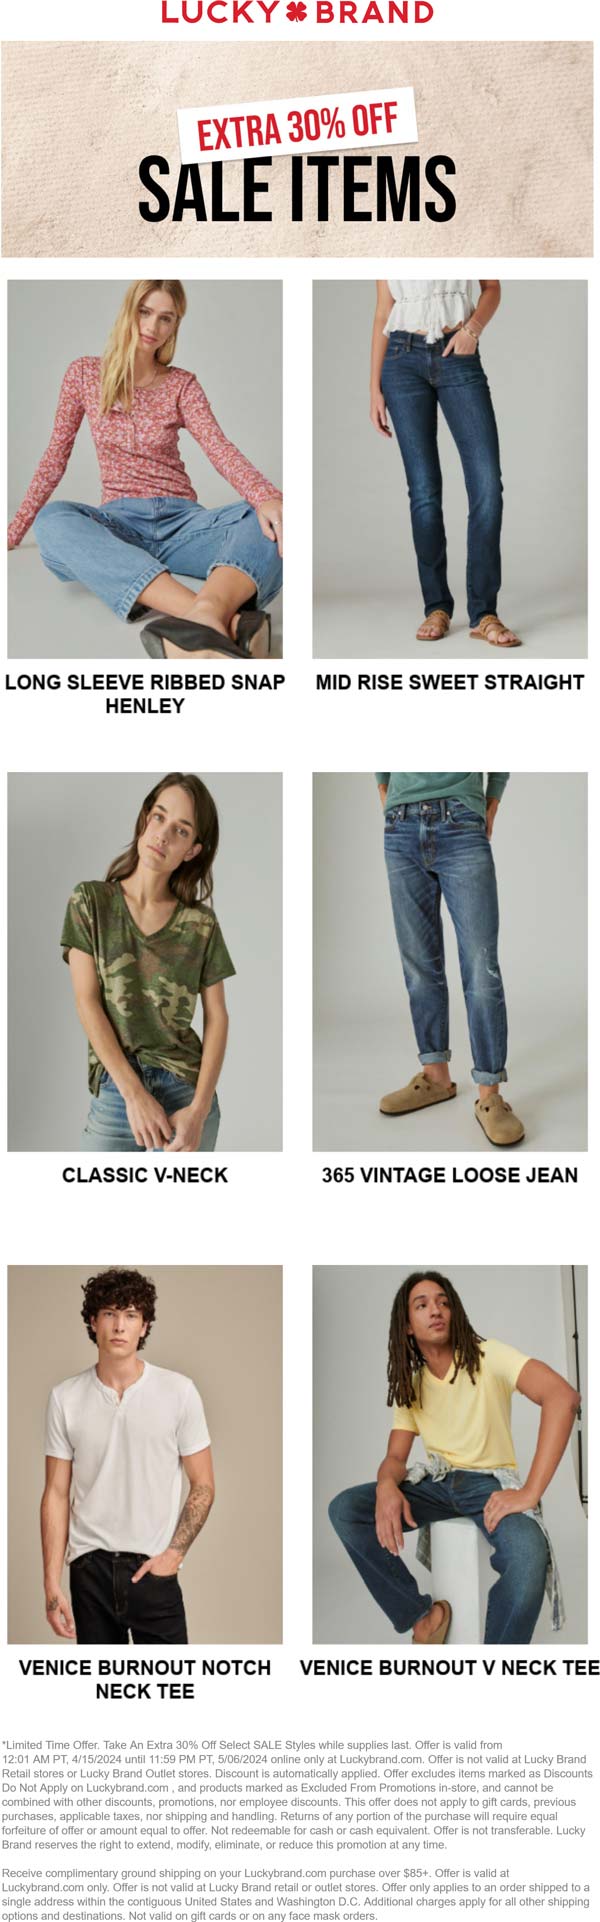 Lucky Brand stores Coupon  Extra 30% off sale items online at Lucky Brand #luckybrand 